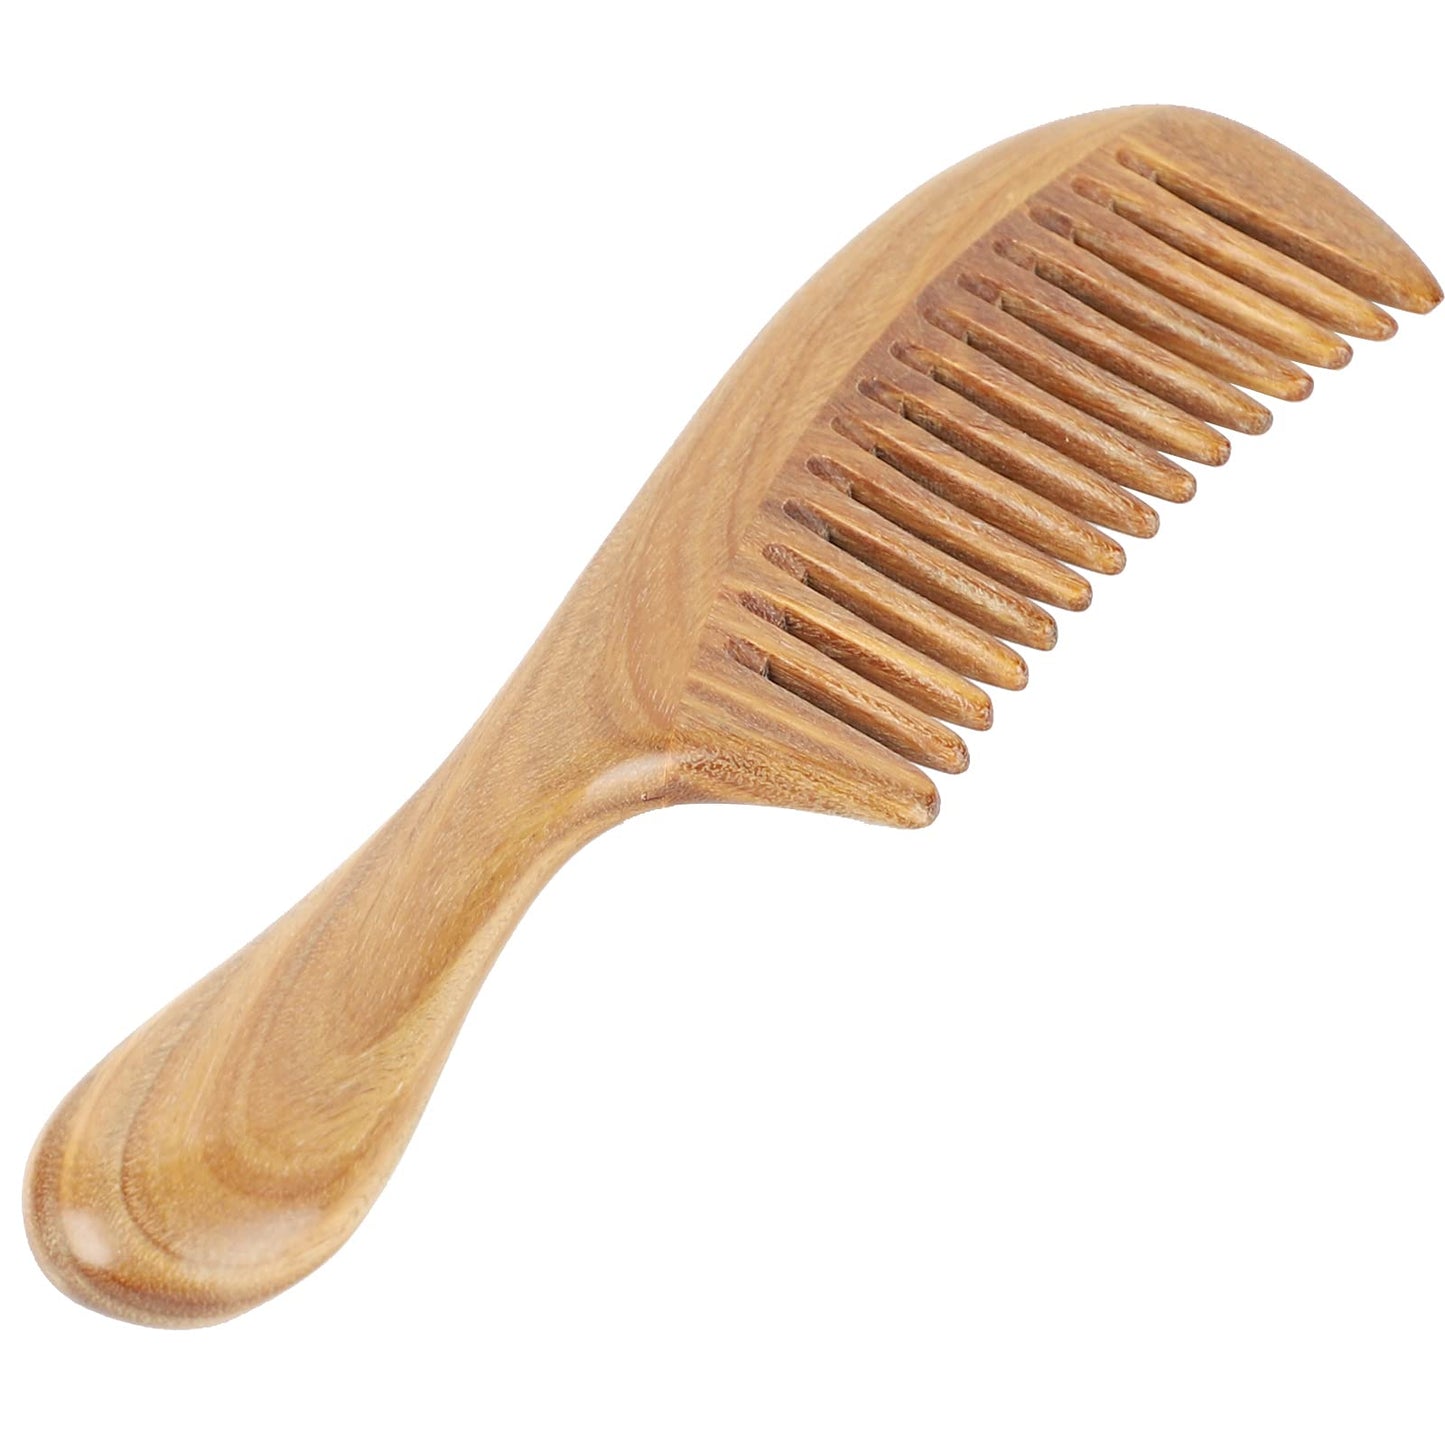 Onedor Handmade 100% Natural Green Sandalwood Hair Combs - Anti-Static Sandalwood Scent Natural Hair Detangler Wooden Comb (Wide Tooth),1 Count (Pack of 1)